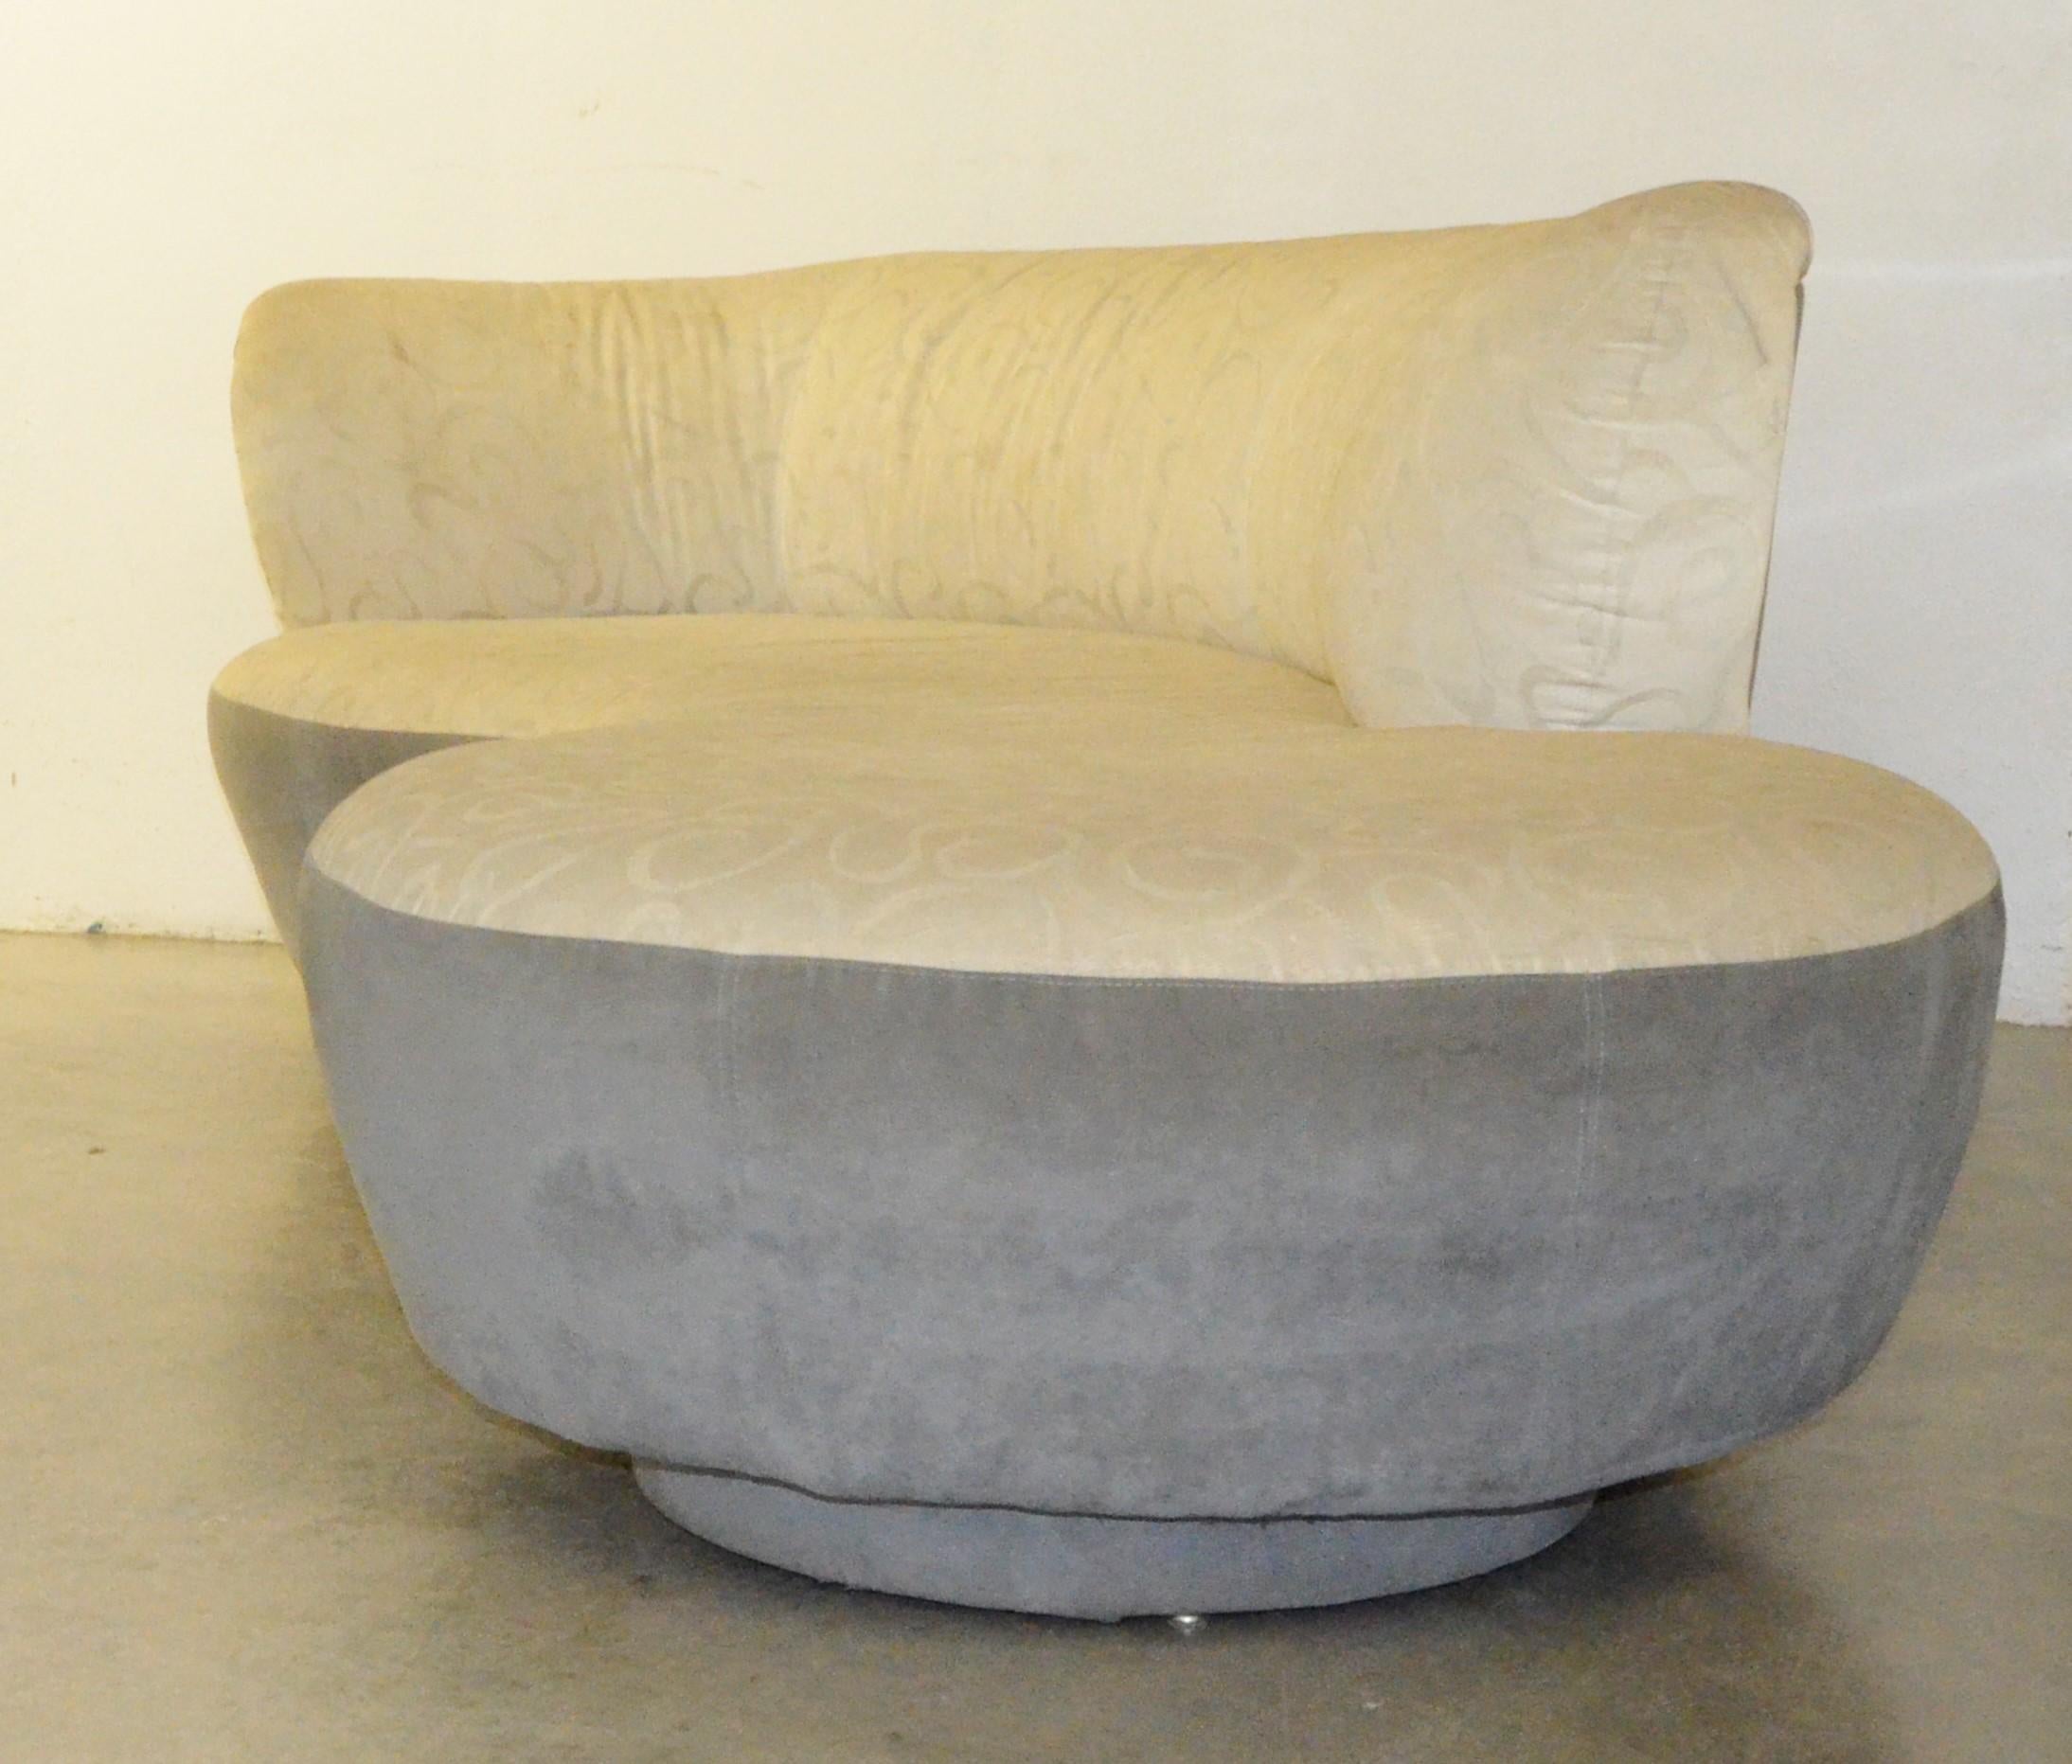 Offered is a cream / ivory /gray colored Mid-Century Modern 